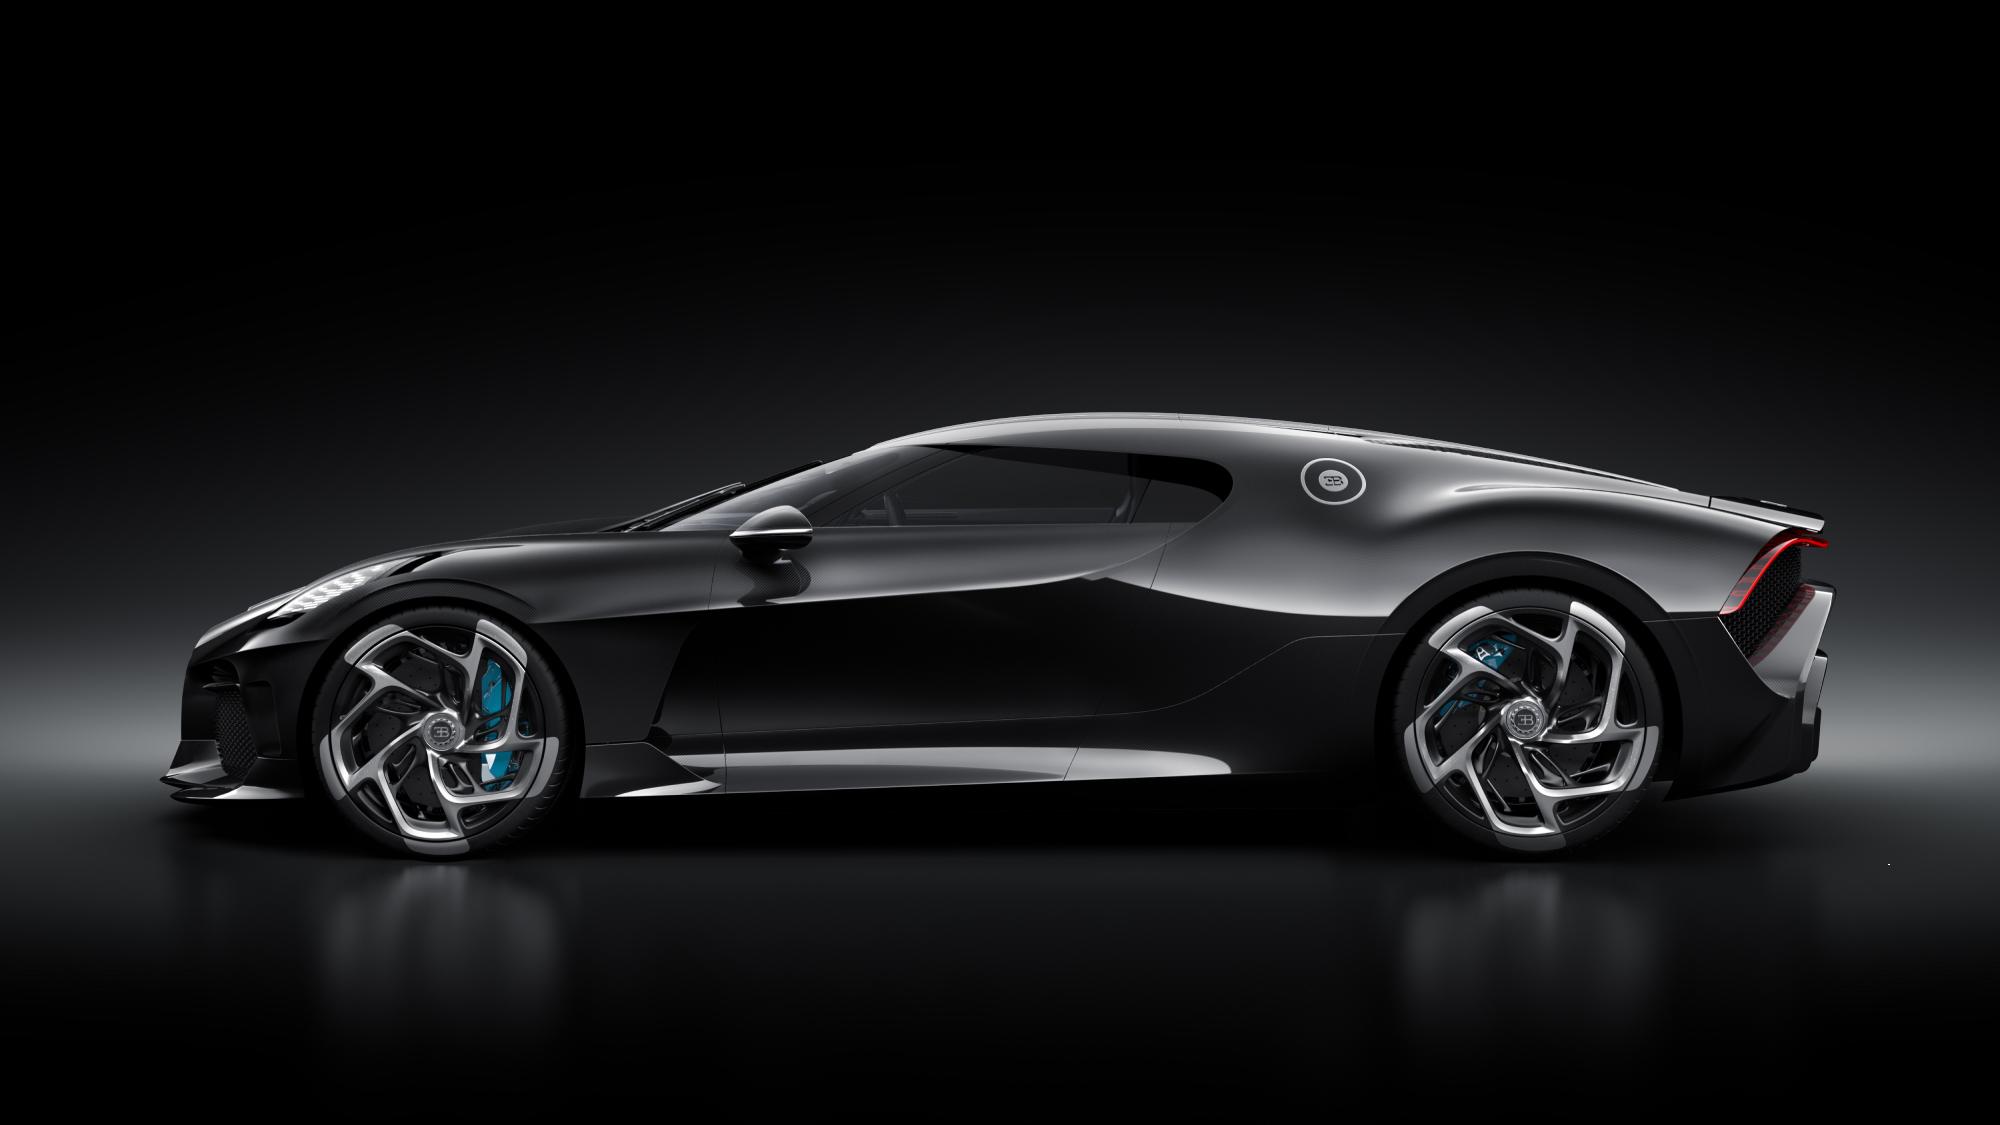 Among a range of uber-pricey luxury cars, the one-of-a-kind $18.7 million Bugatti La Voiture Noire is the most expensive new car in history.